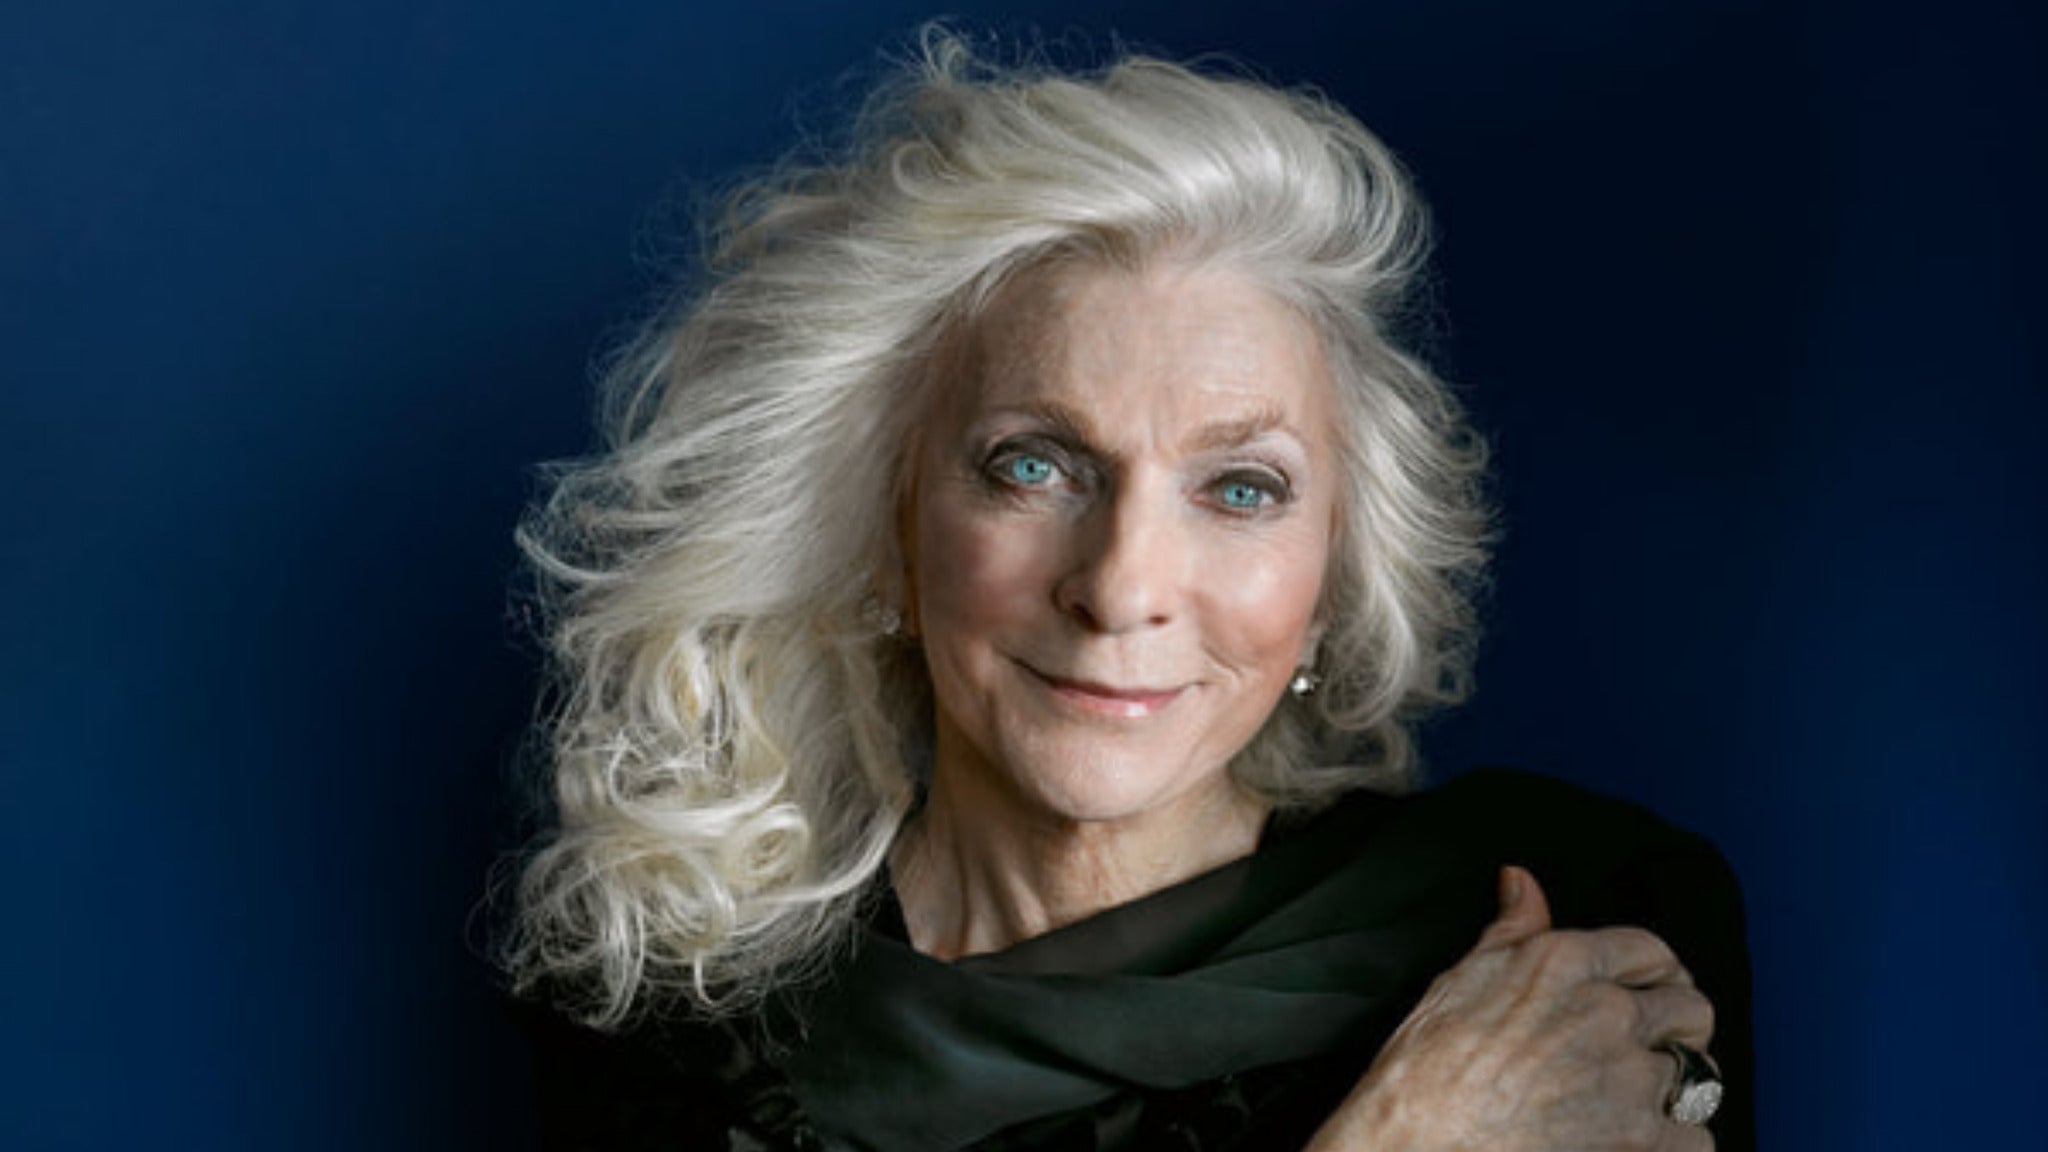 Judy Collins accompanied by the Space Coast Symphony Orchestra presale password for early tickets in Daytona Beach